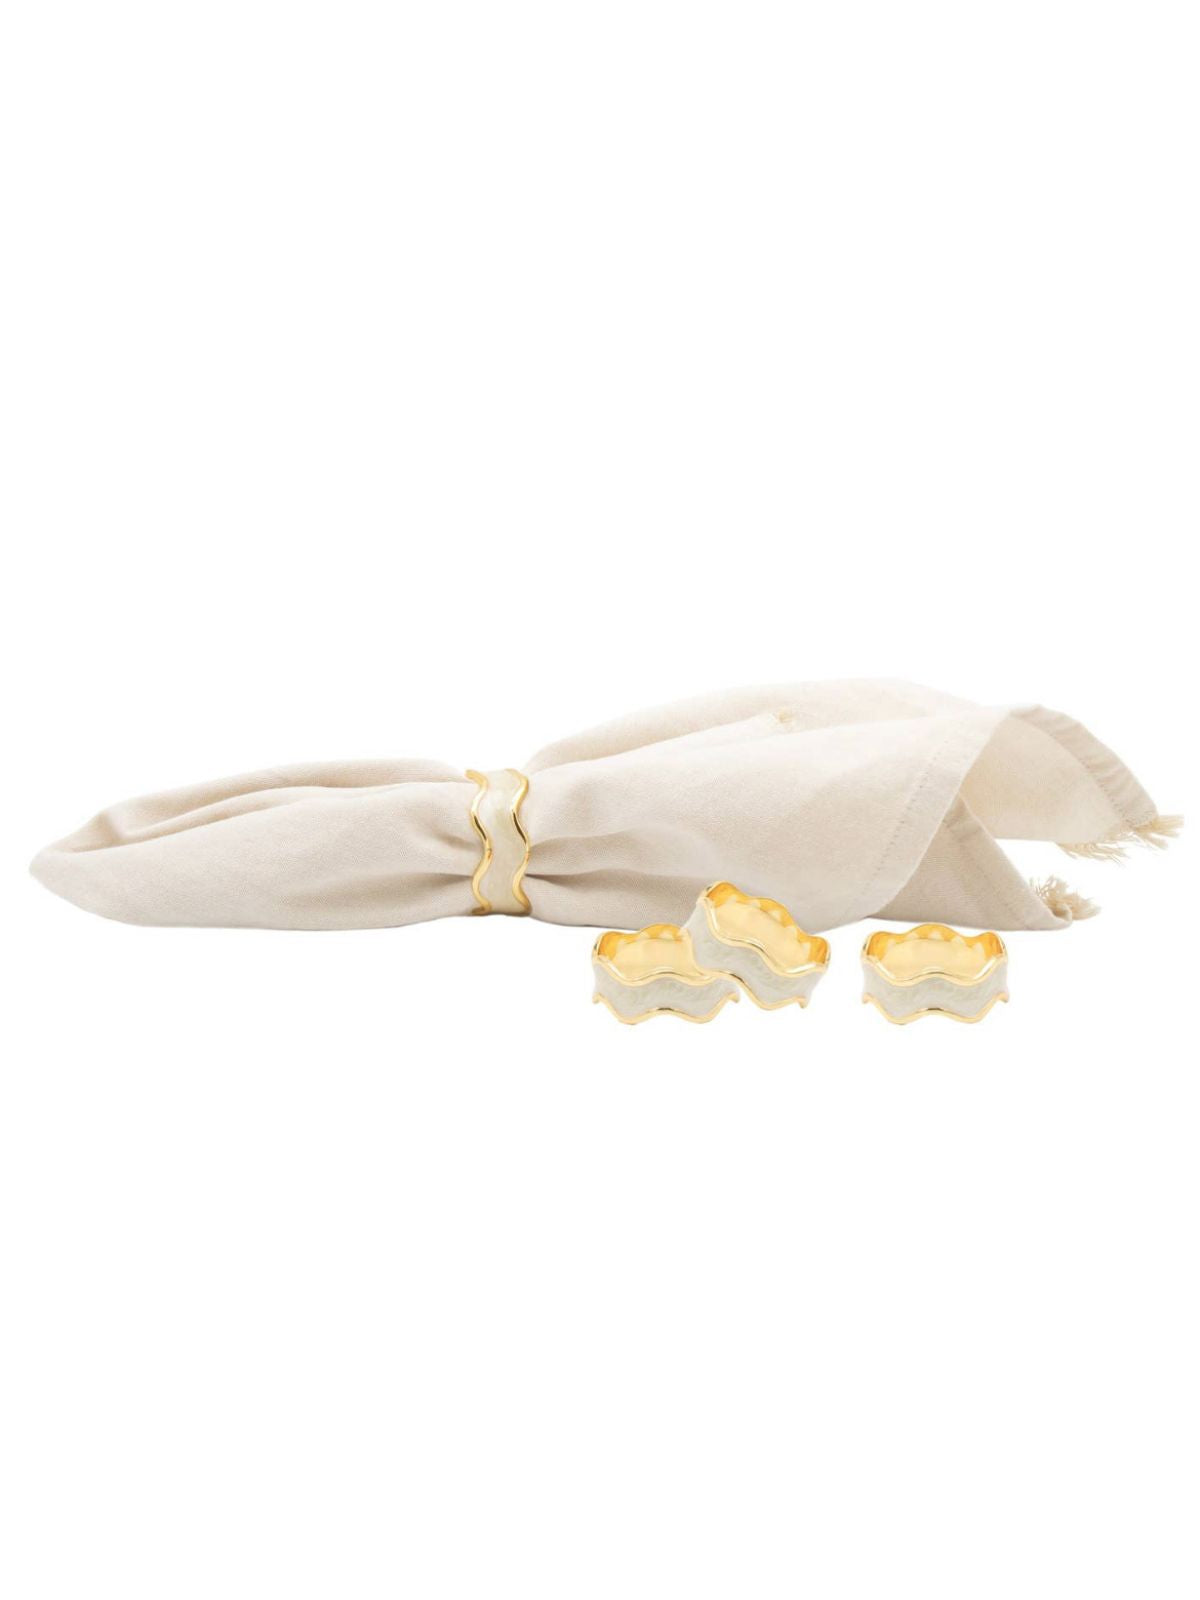 This Set of 4 White and Gold Swirl Designed Napkin Rings are perfect for a Luxury Table Decor.